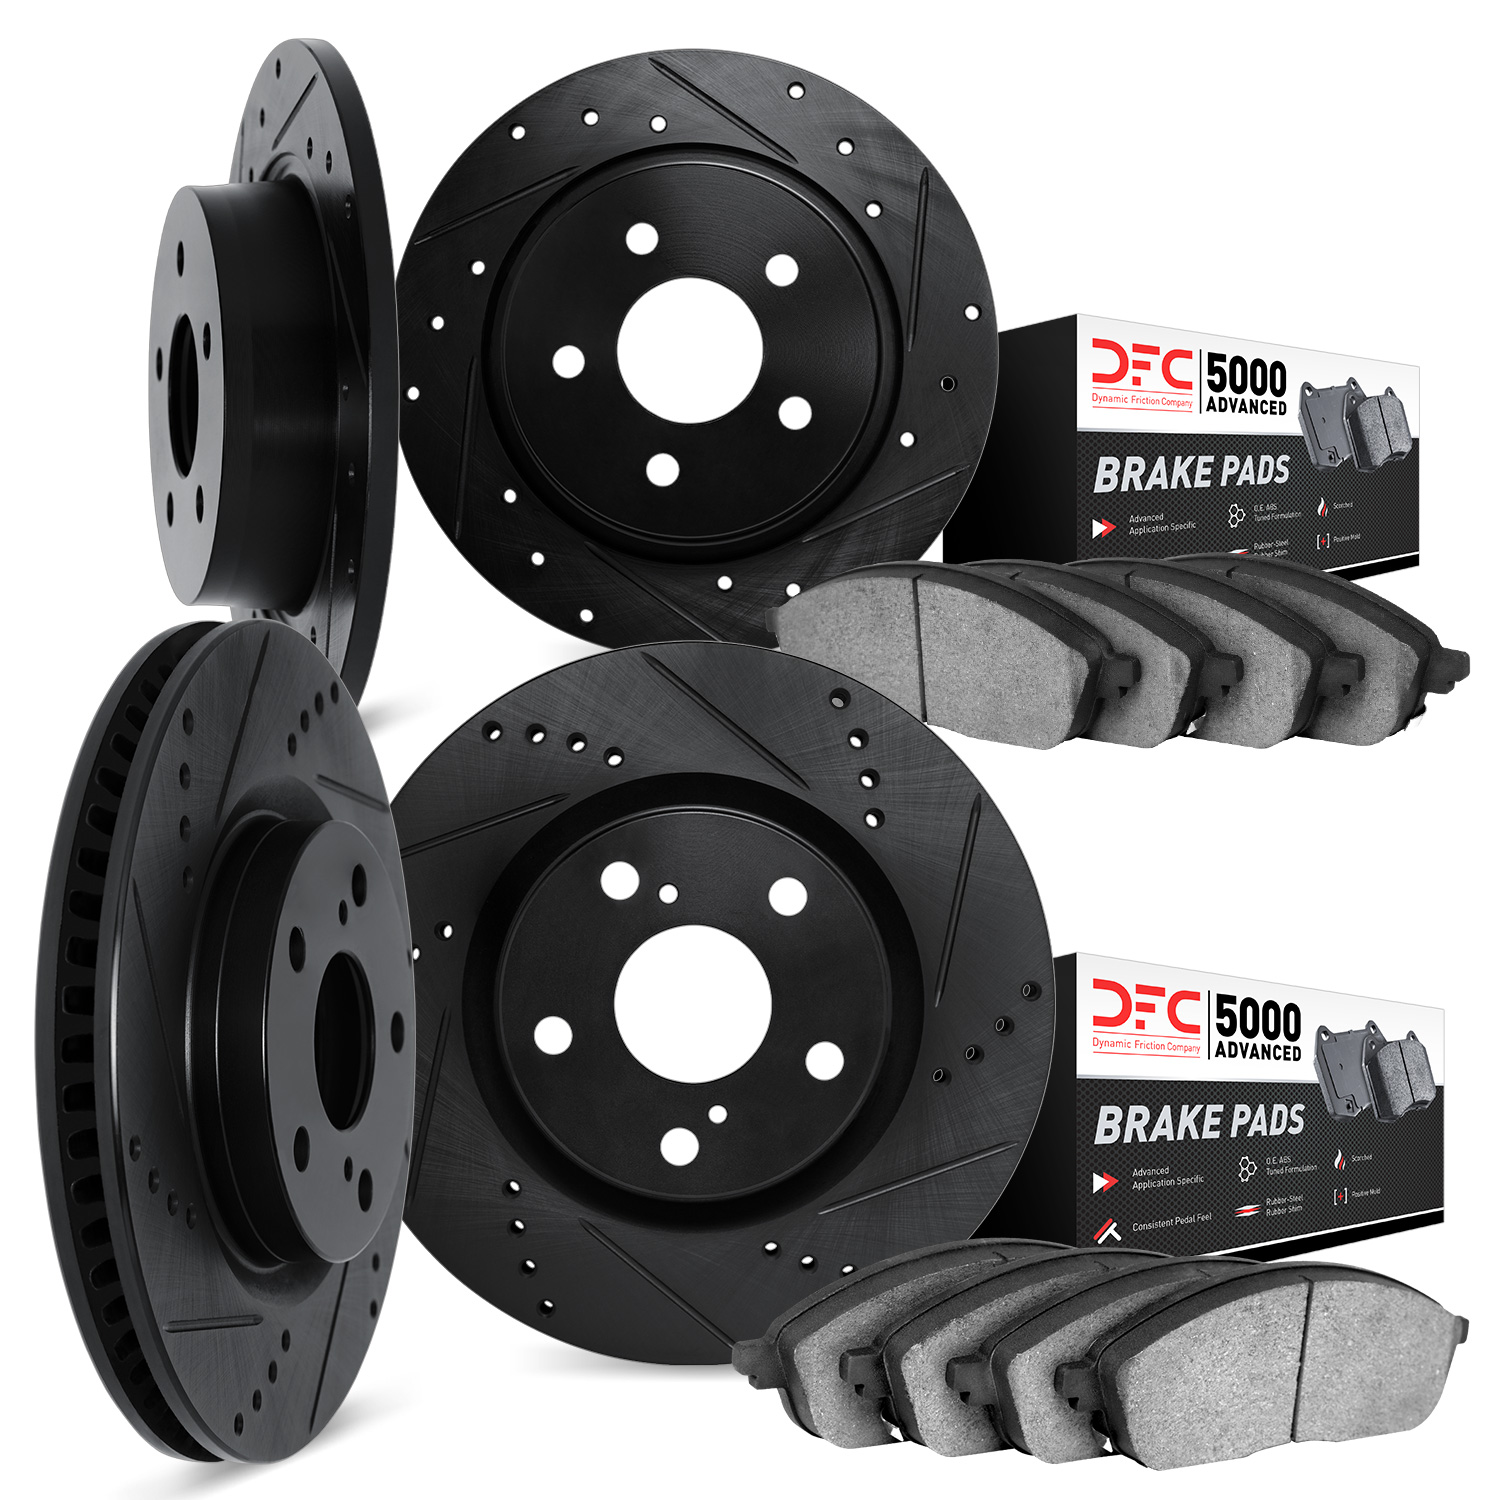 8504-72054 Drilled/Slotted Brake Rotors w/5000 Advanced Brake Pads Kit [Black], 2004-2011 Mitsubishi, Position: Front and Rear